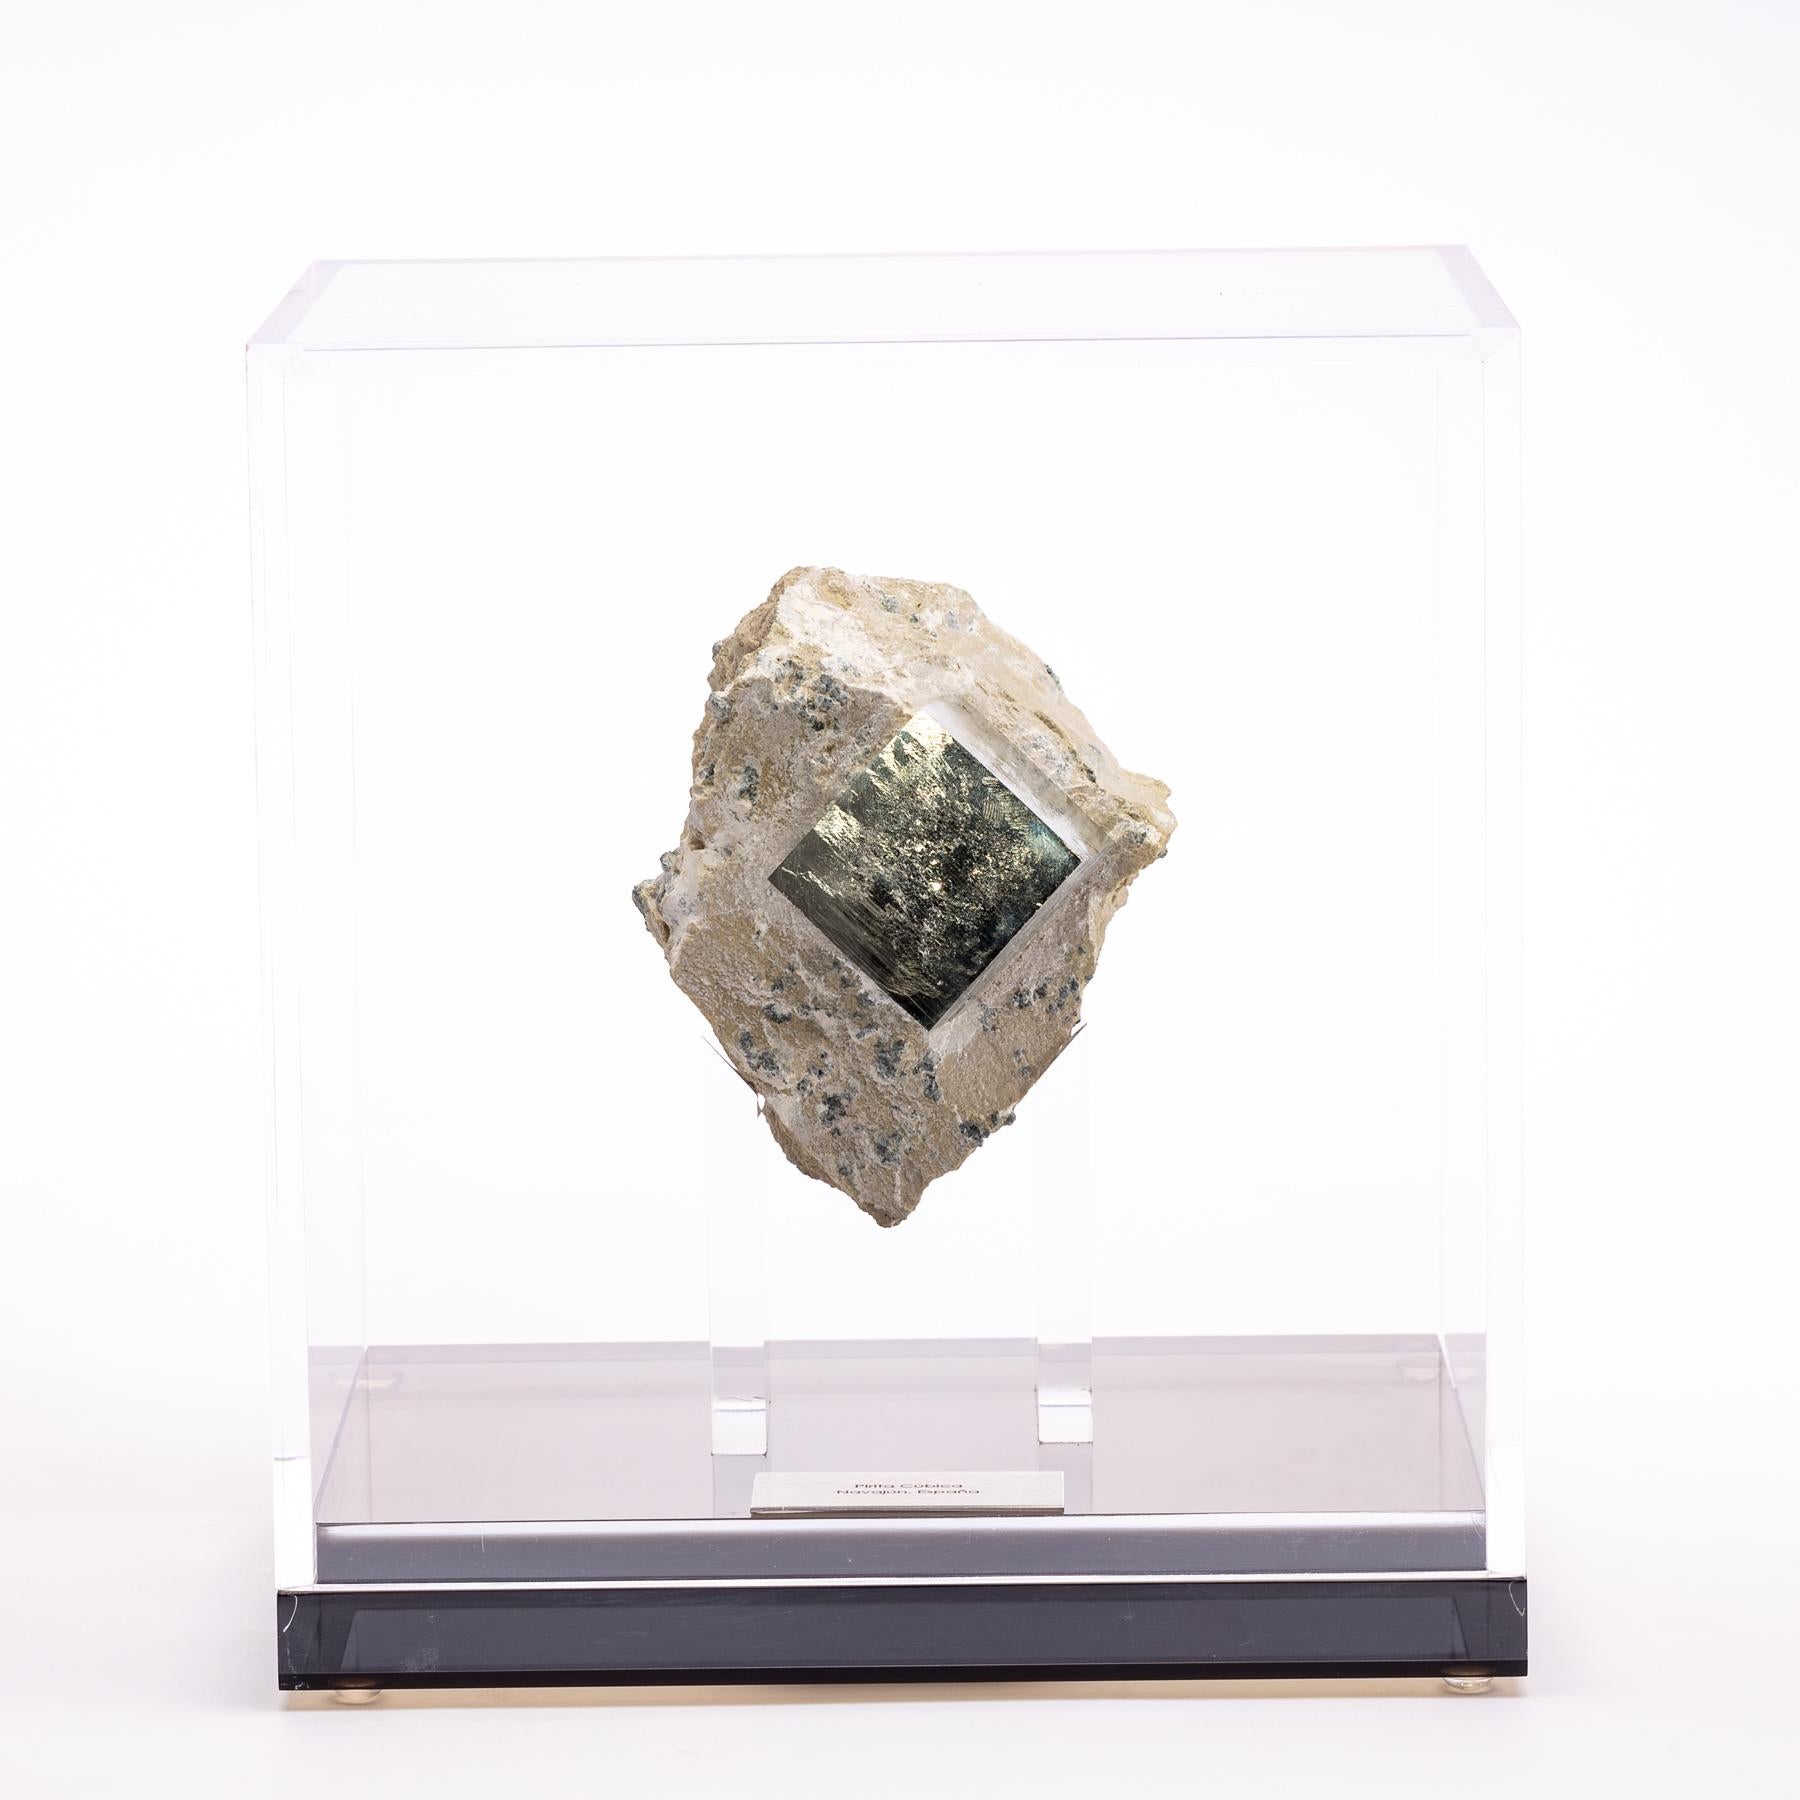 Impressive perfect natural pyrite cube from Navajun, Spain mounted in a custom made acrylic box.